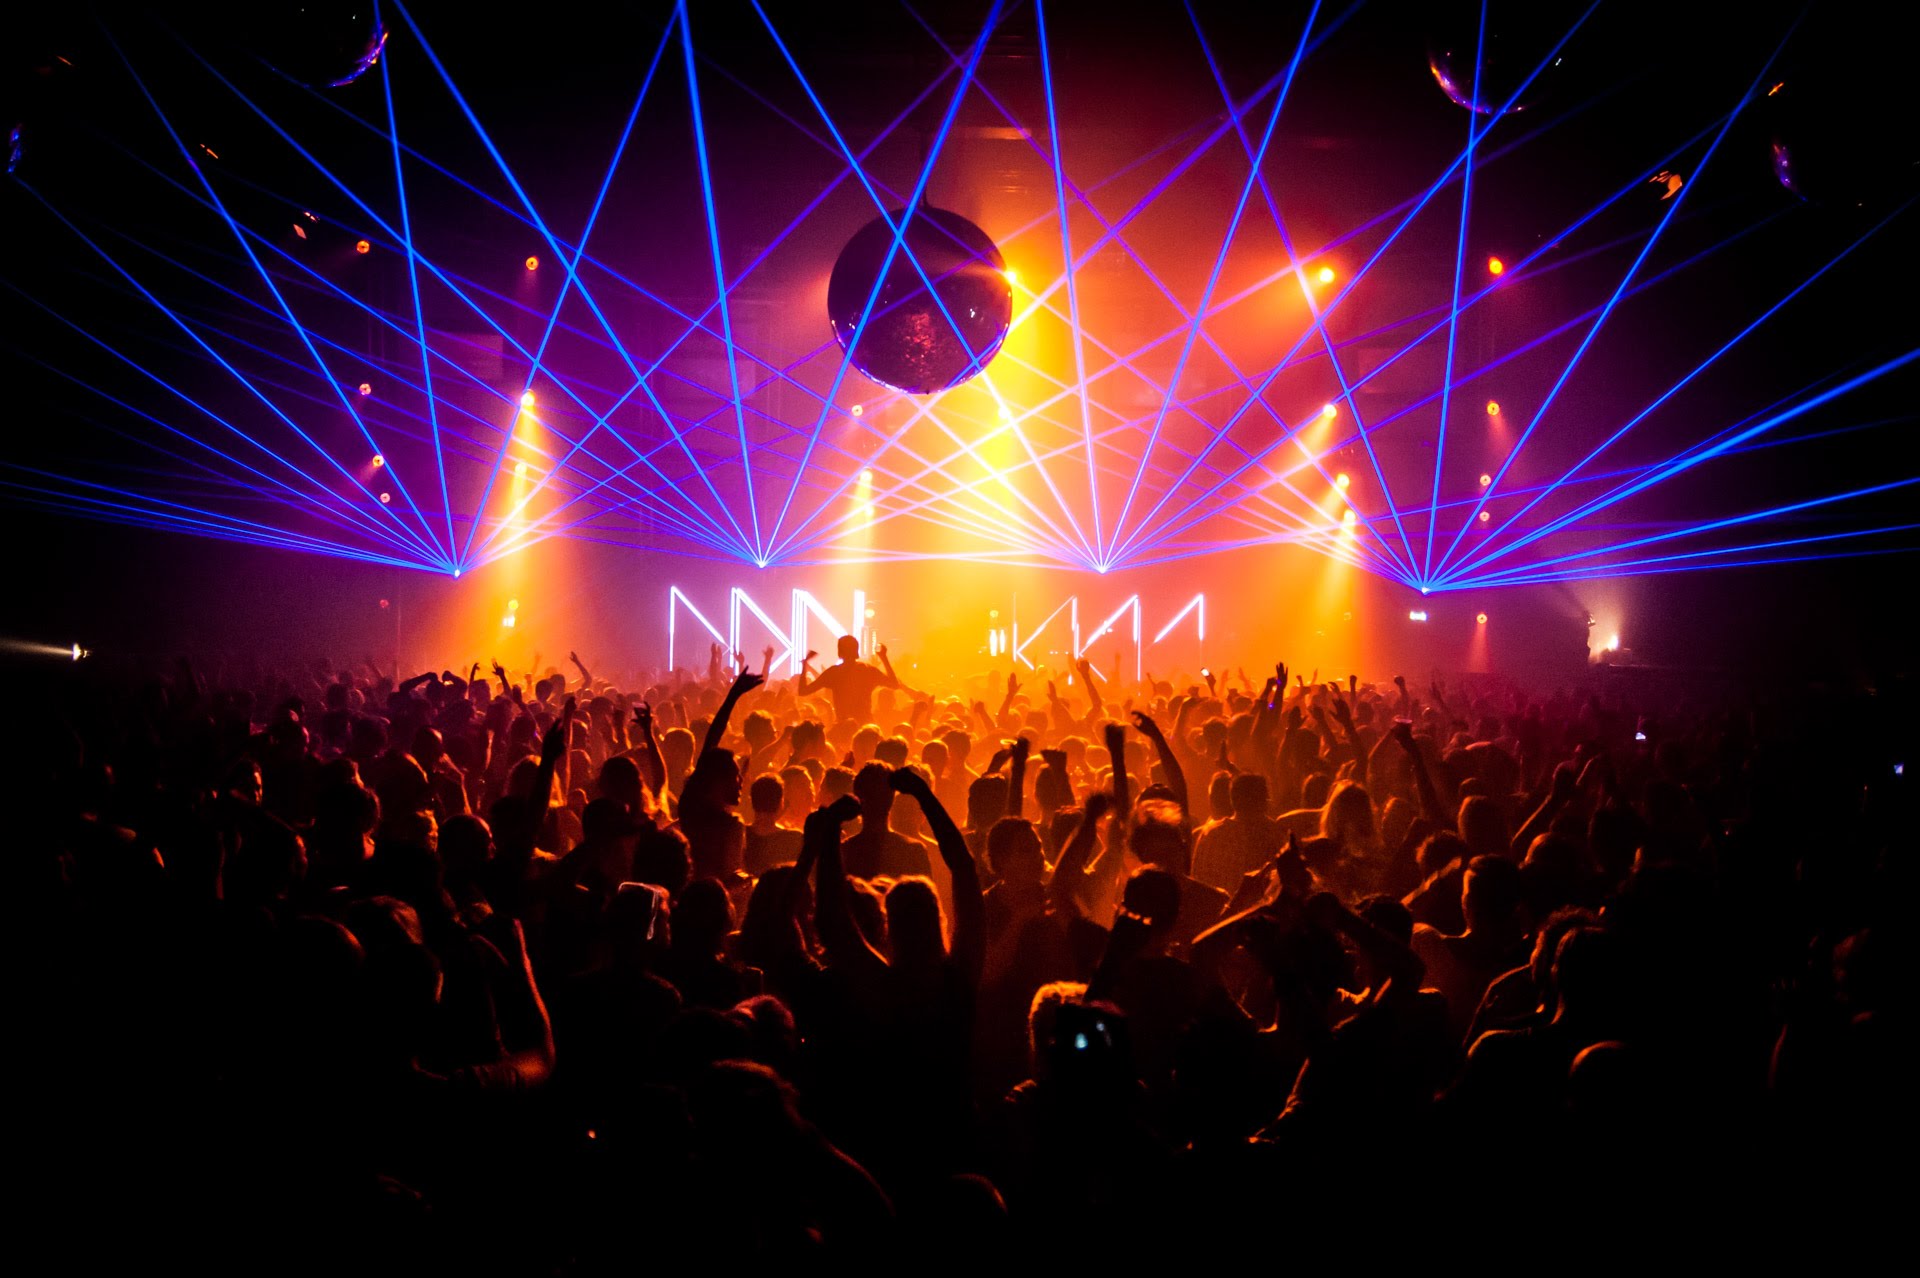 Amsterdam Dance Event Announces A Record-Breaking Lineup Of 2500 Performers